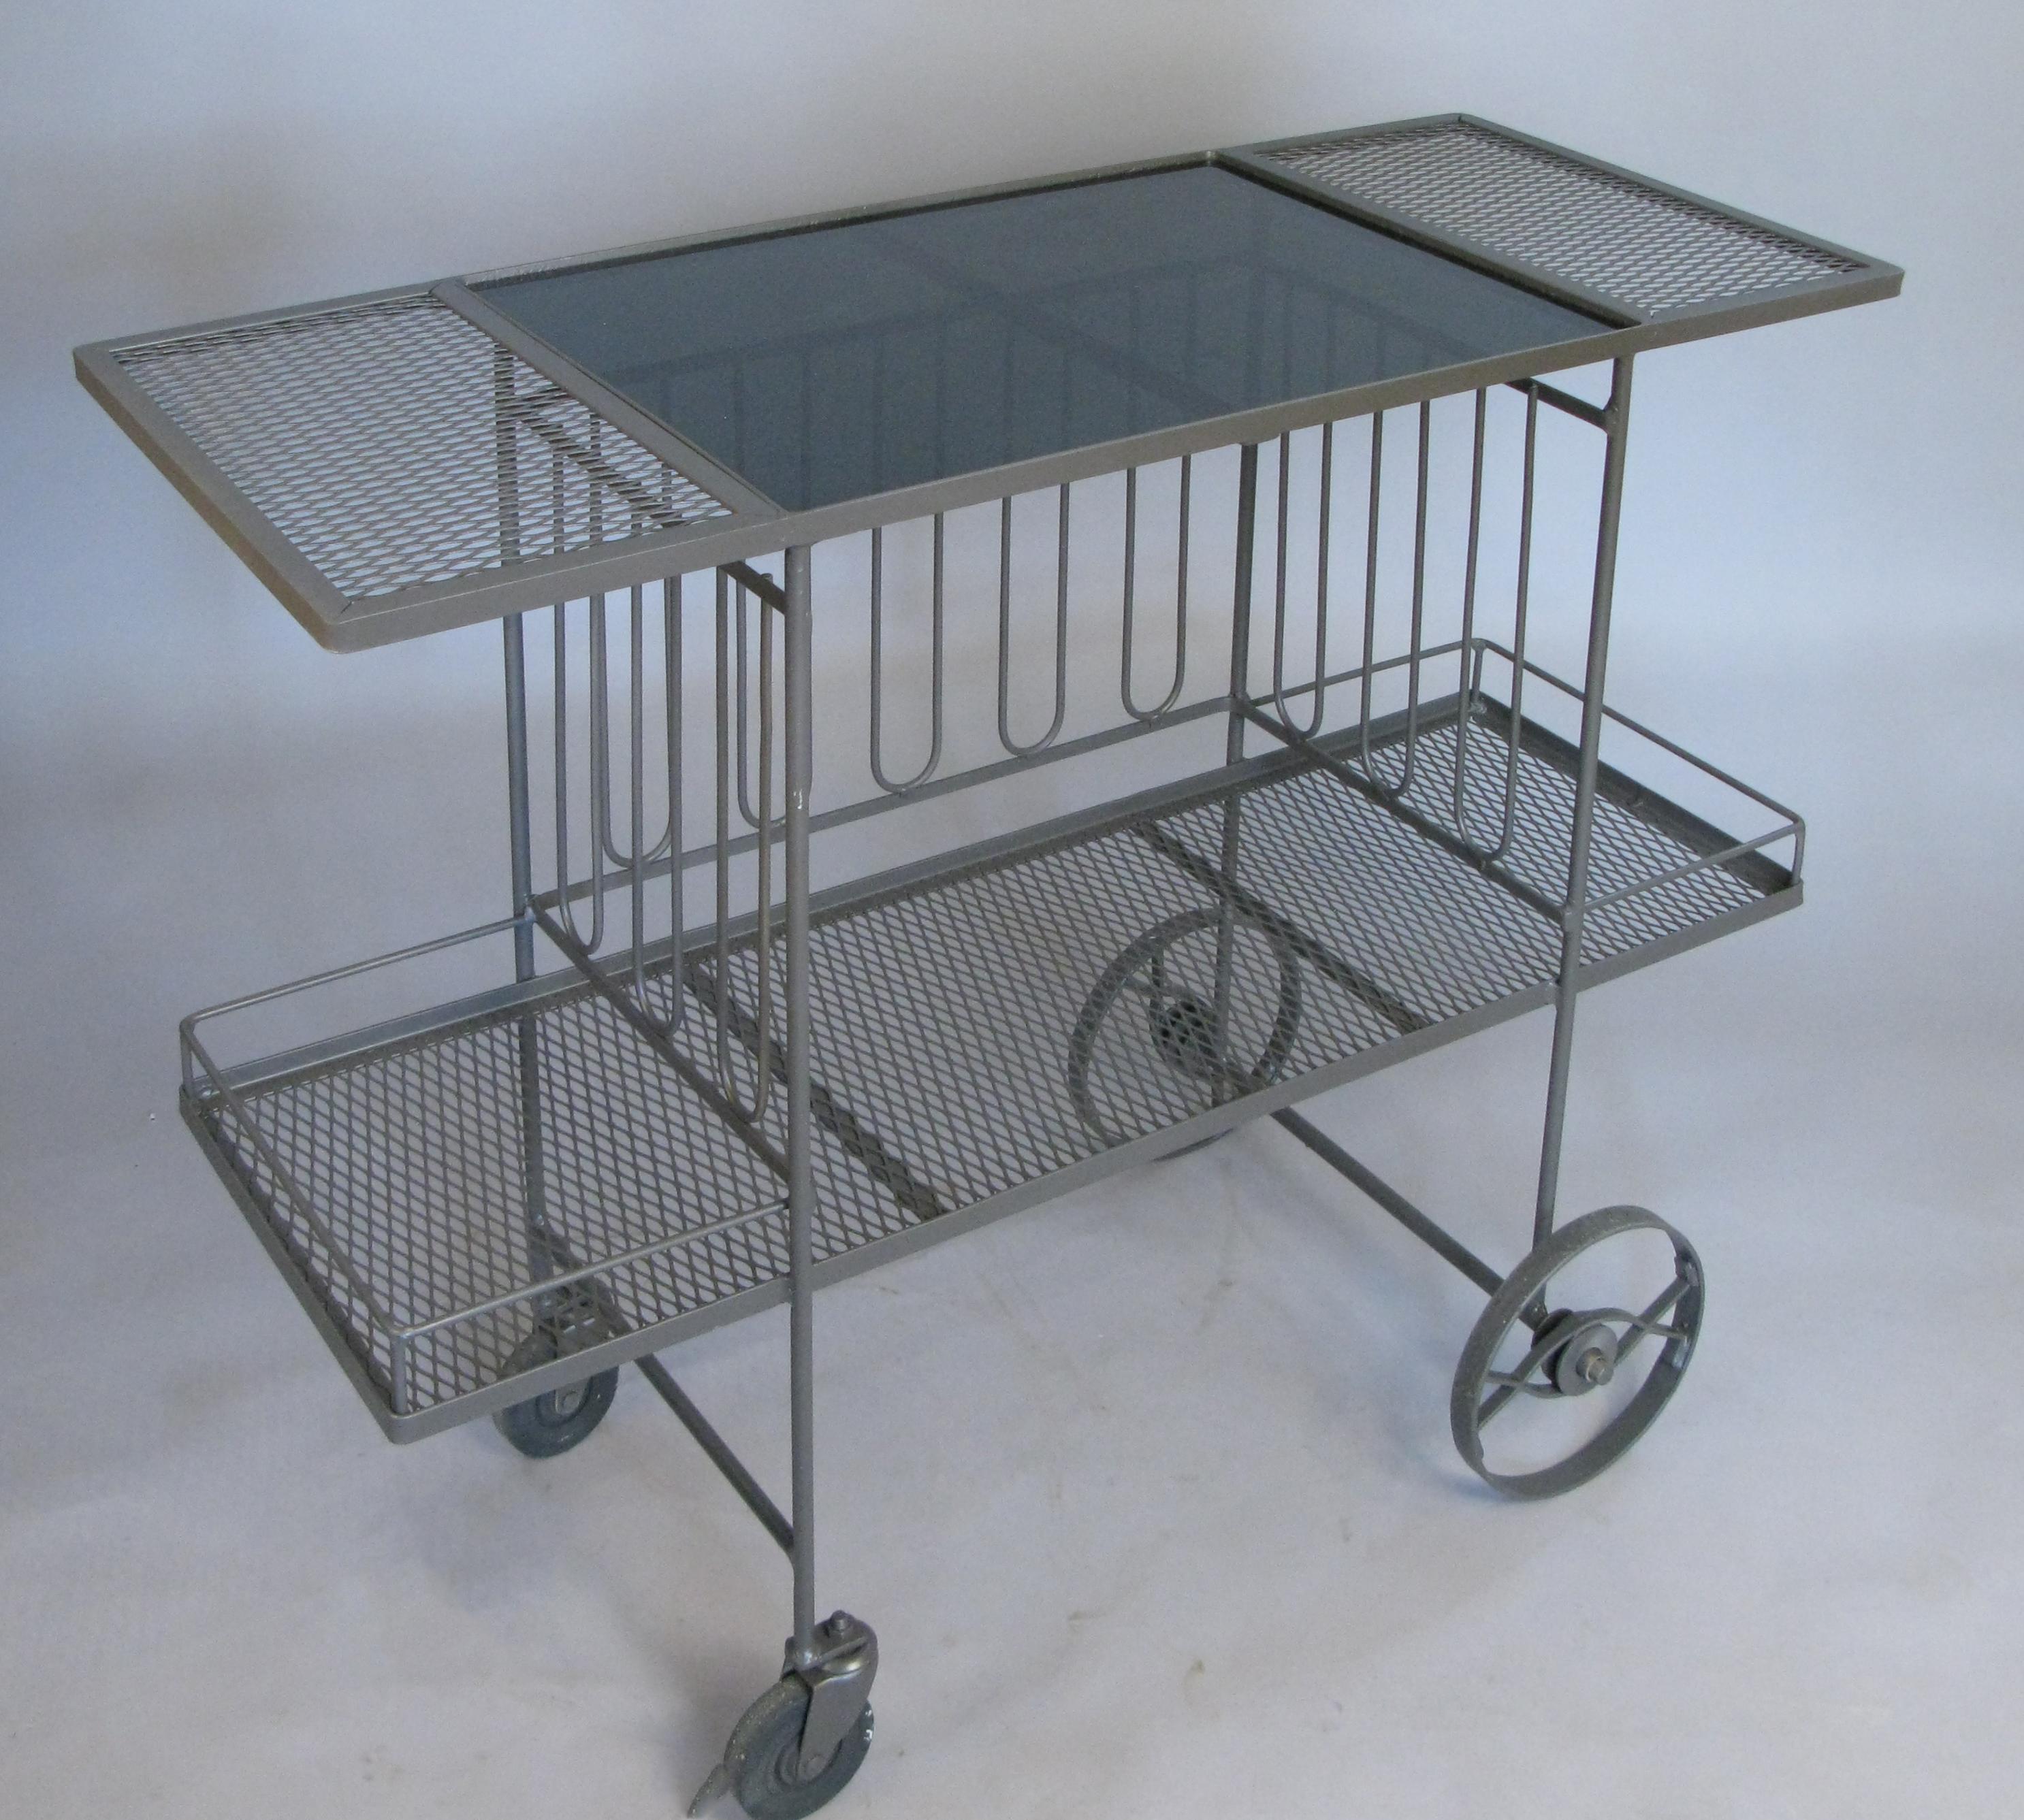 A very nice 1950s rolling bar cart in wrought iron with long vertical details around the center section, lower shelf with gallery rail, and a smoked black glass top, by Salterini.